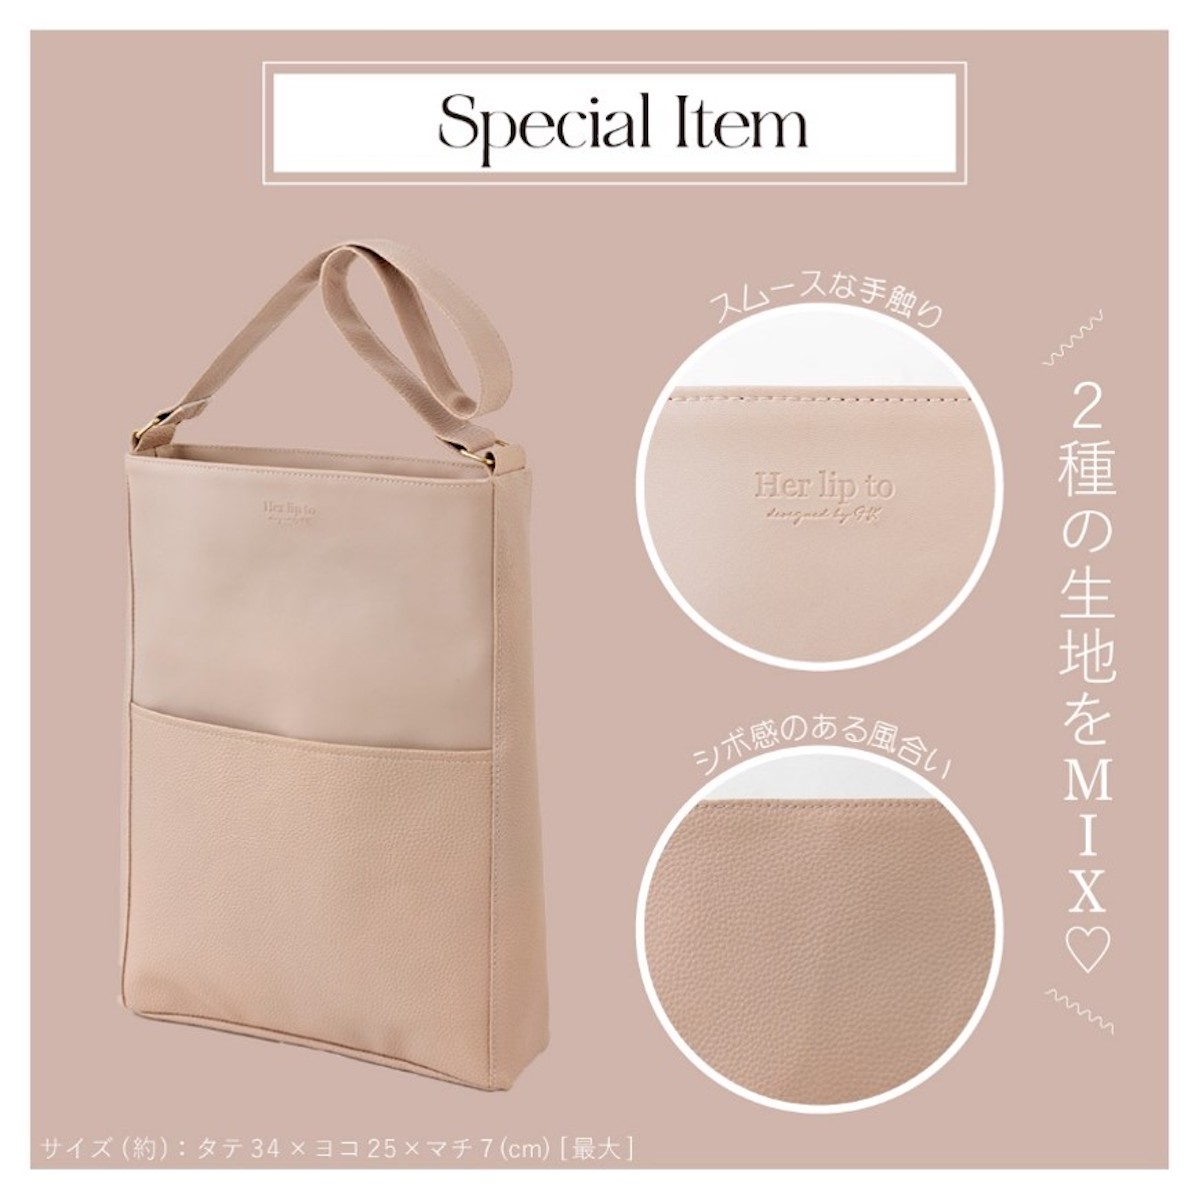 her lip to(ハーリップトゥ) Icon Tote Bag - トートバッグ